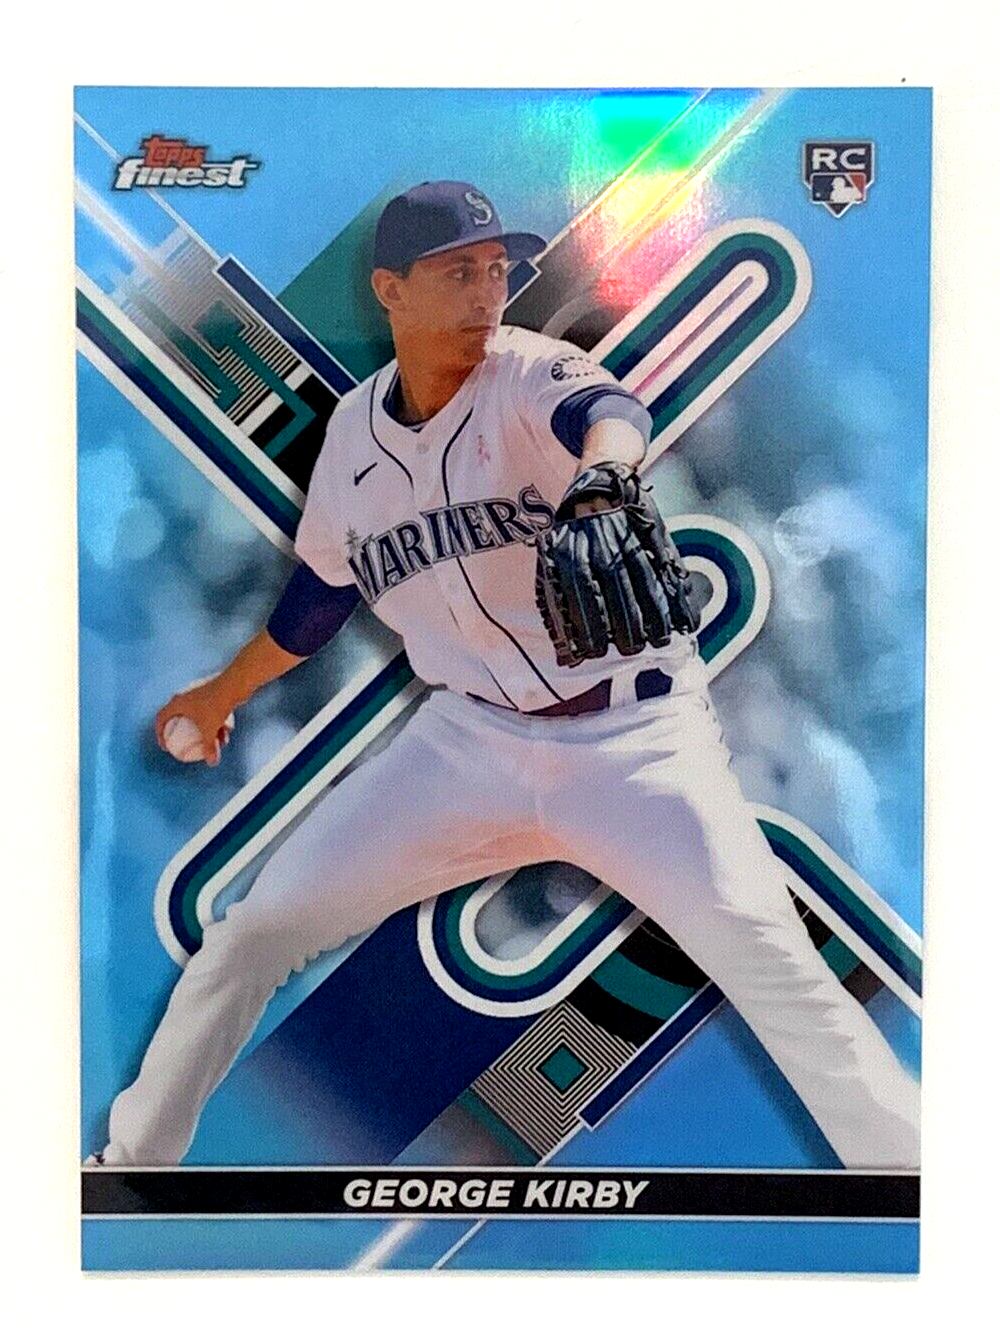 2022 TOPPS Finest Blue Refractor /300 George Kirby Rookie #12 Seattle Mariners